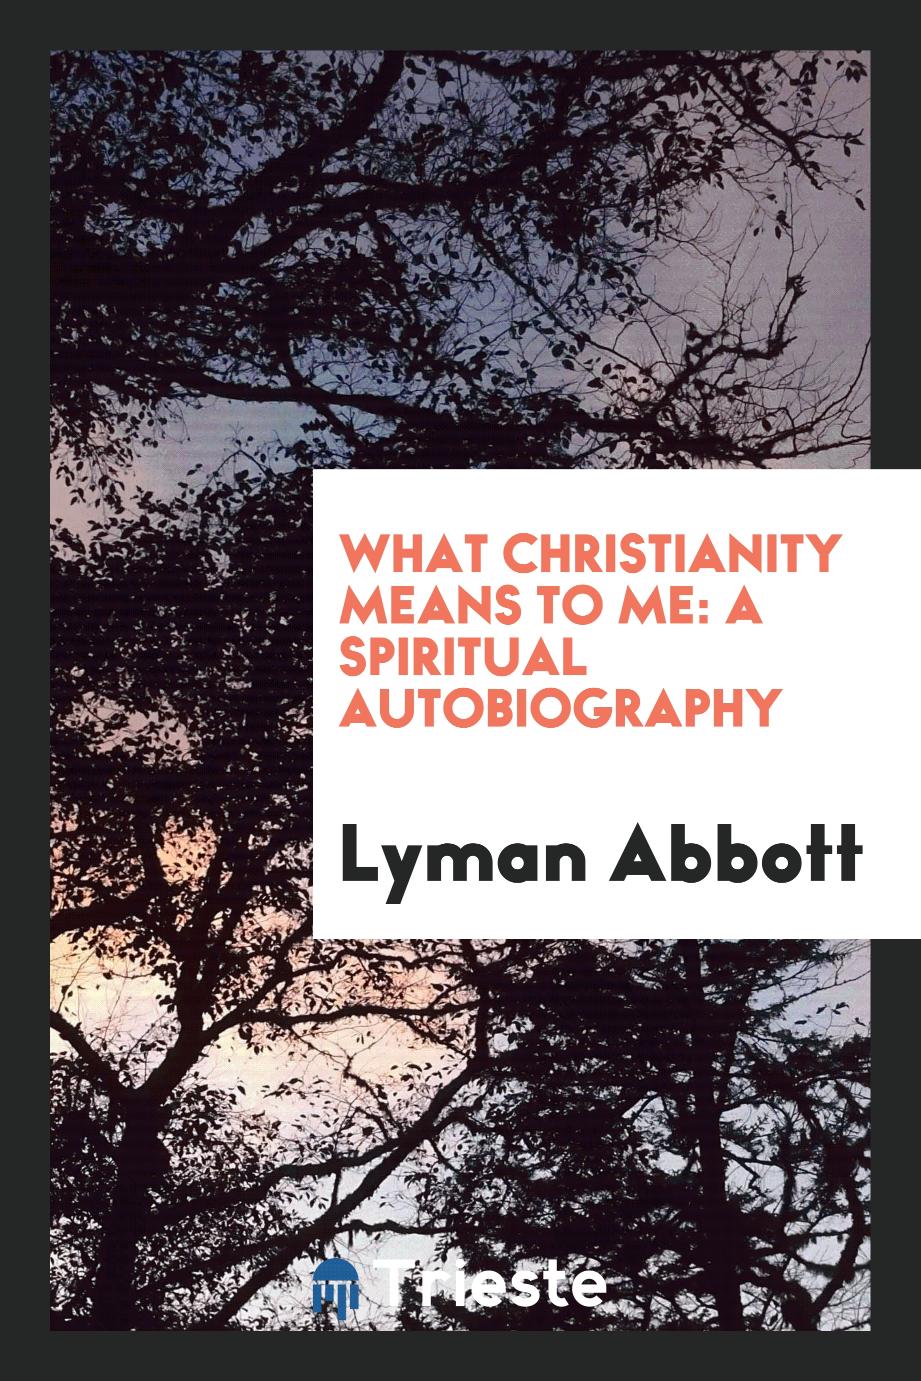 What Christianity means to me: A spiritual autobiography